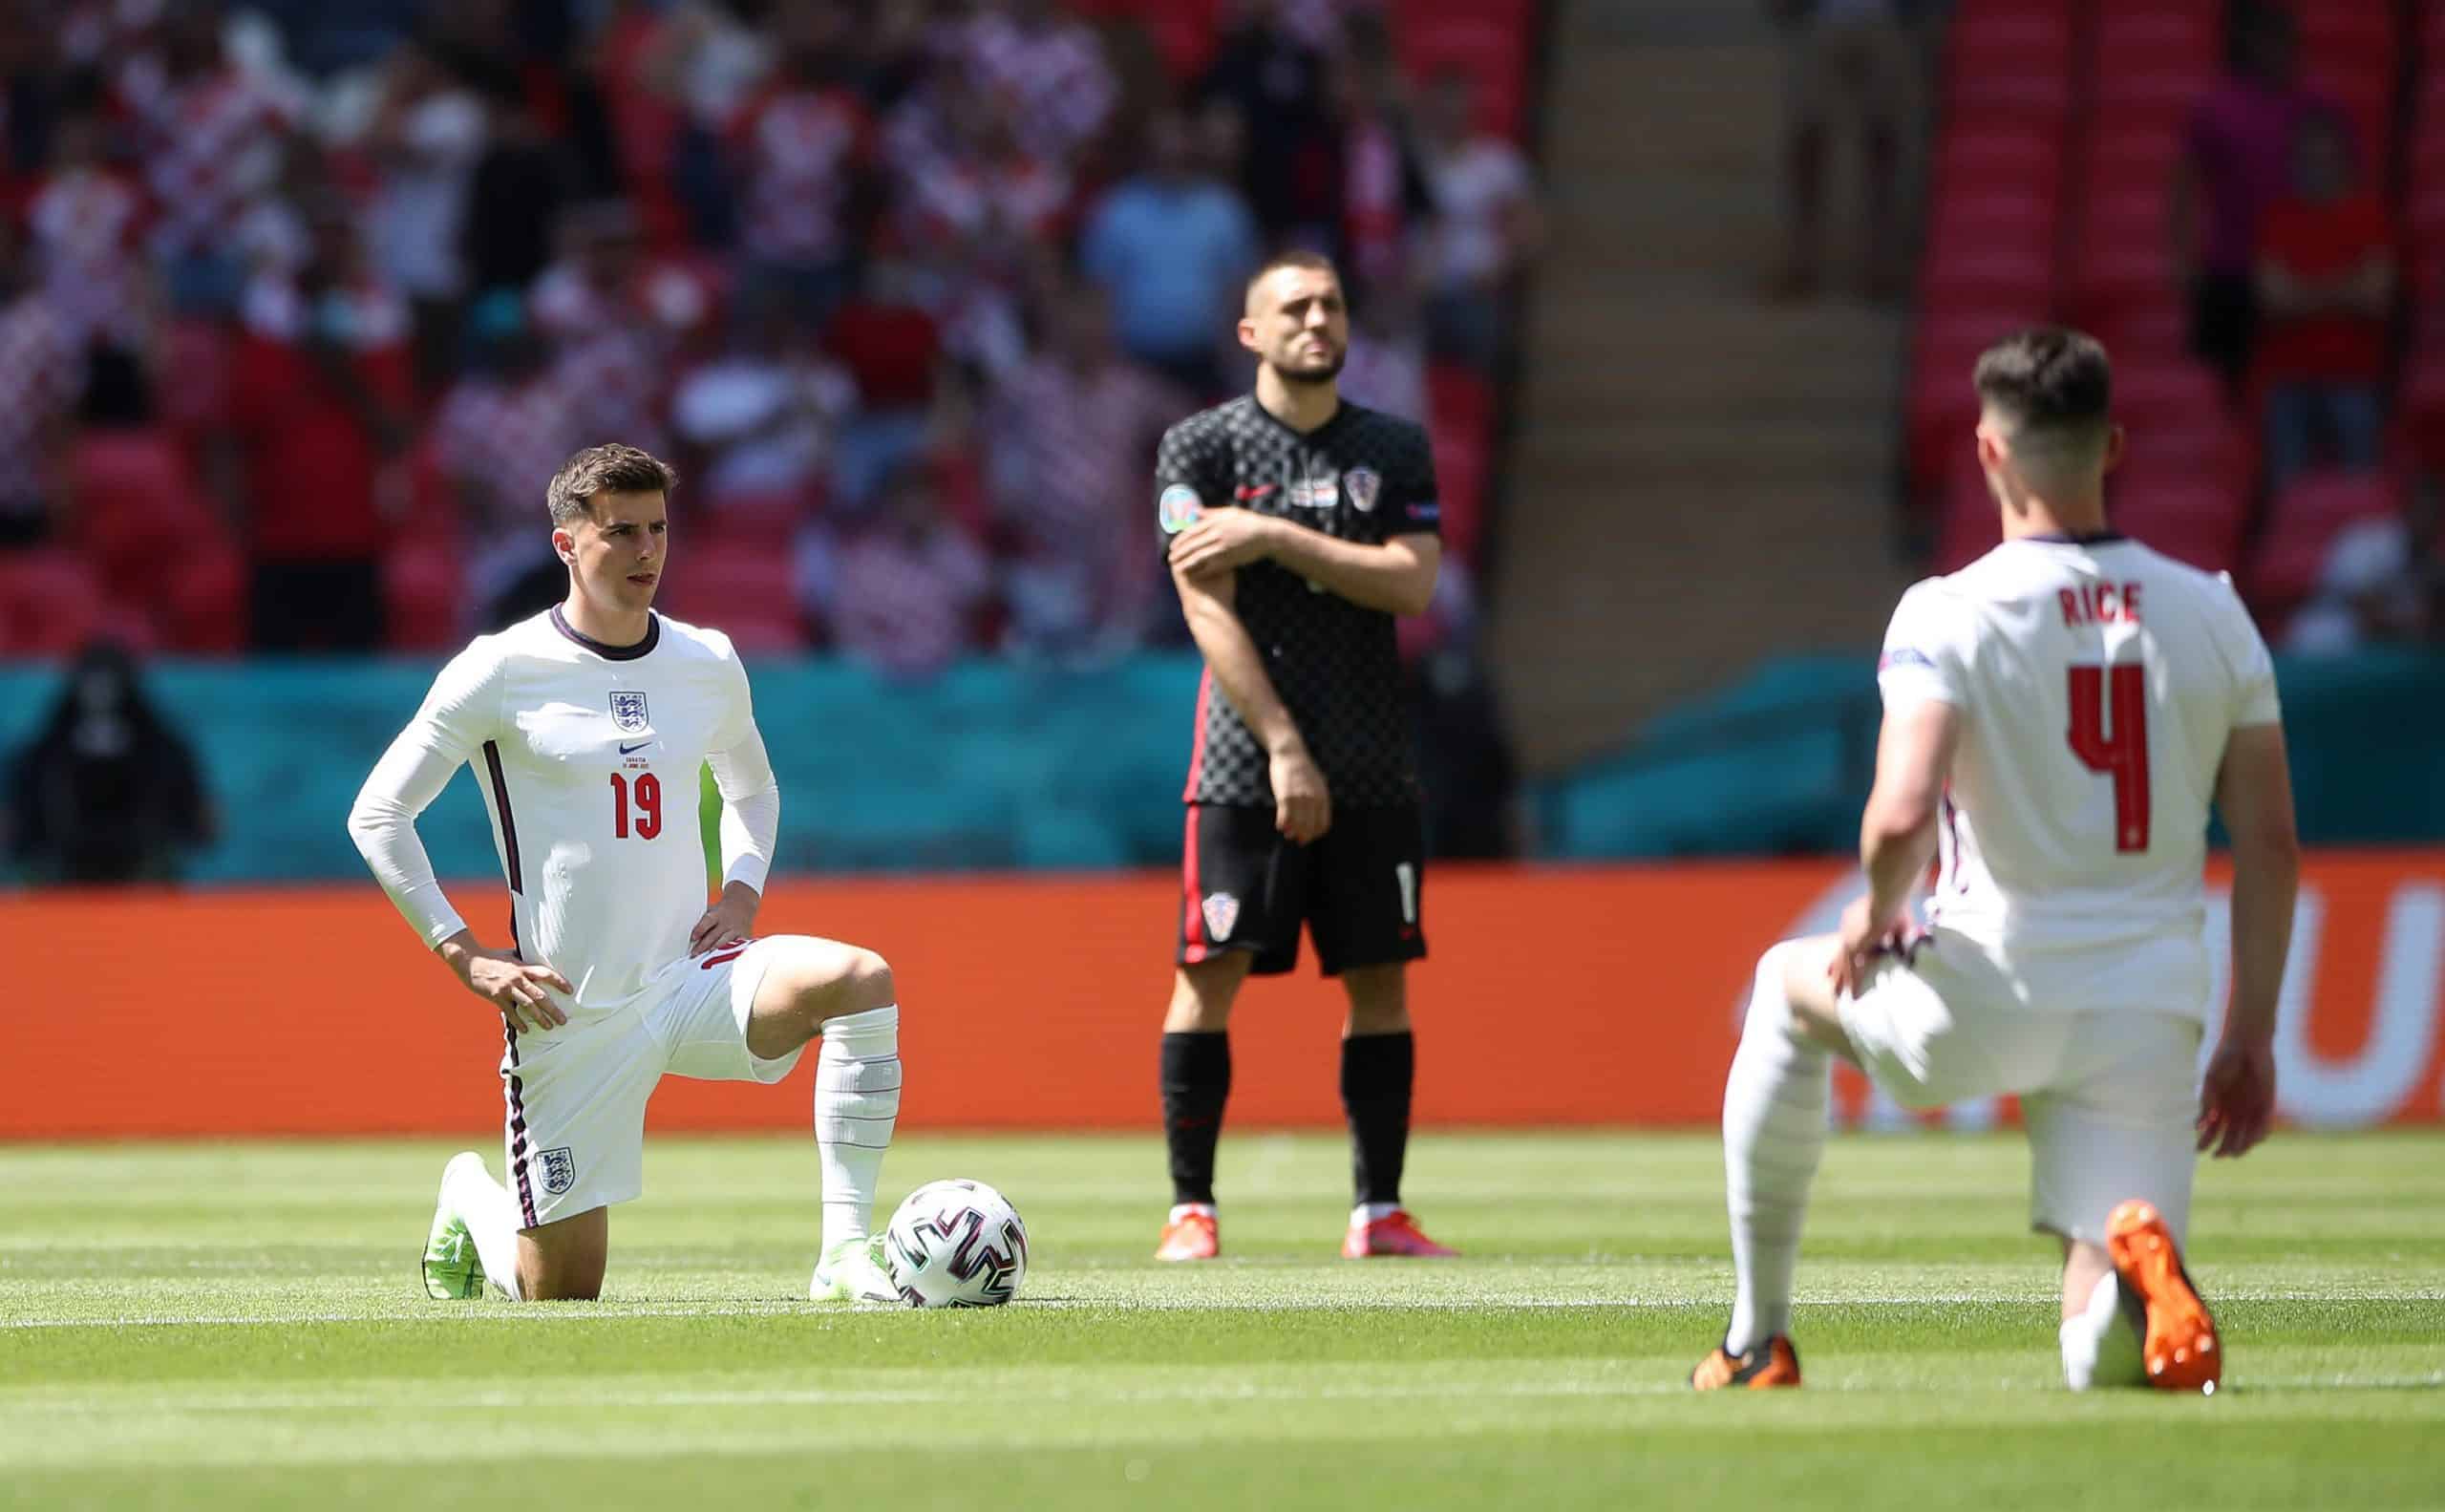 Jacob Rees-Mogg defends fans booing England players for taking the knee